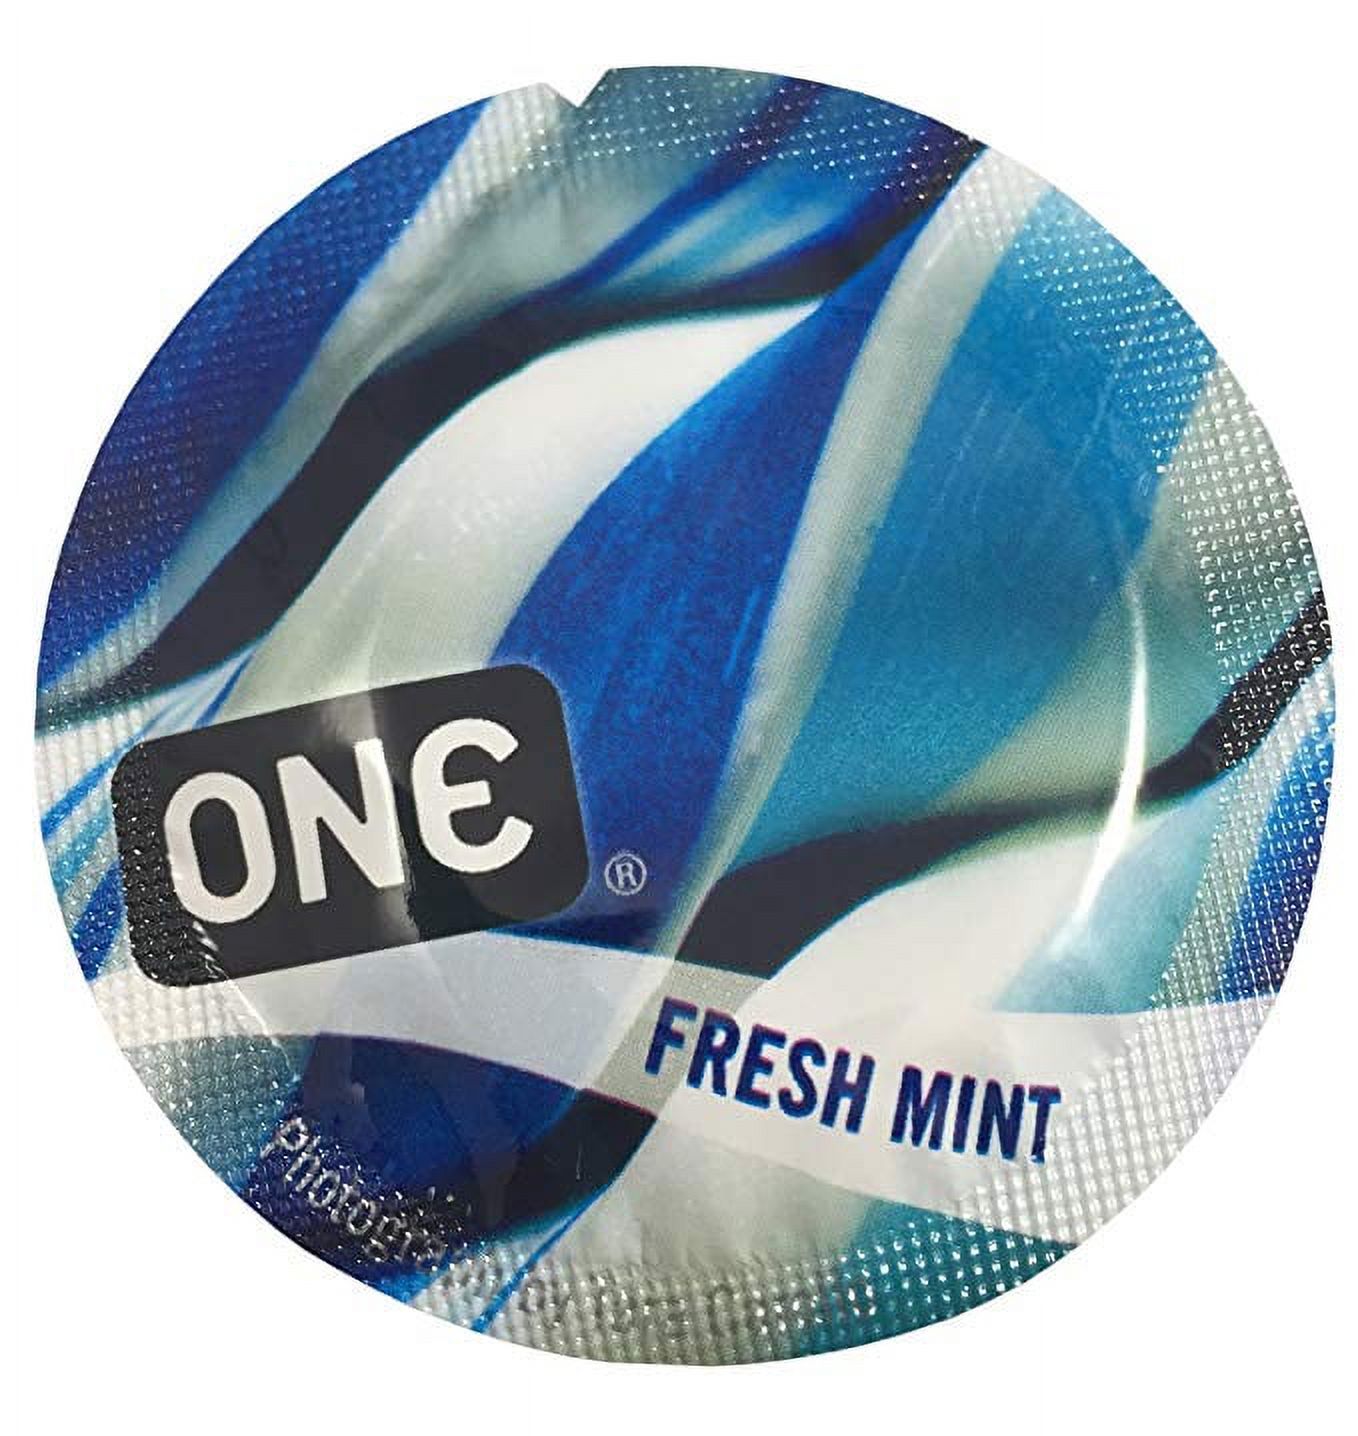 ONE Fresh Mint + Brass Lunamax Pocket Case, Premium Lubricated Flavored Latex Condoms-24 Count - image 1 of 5